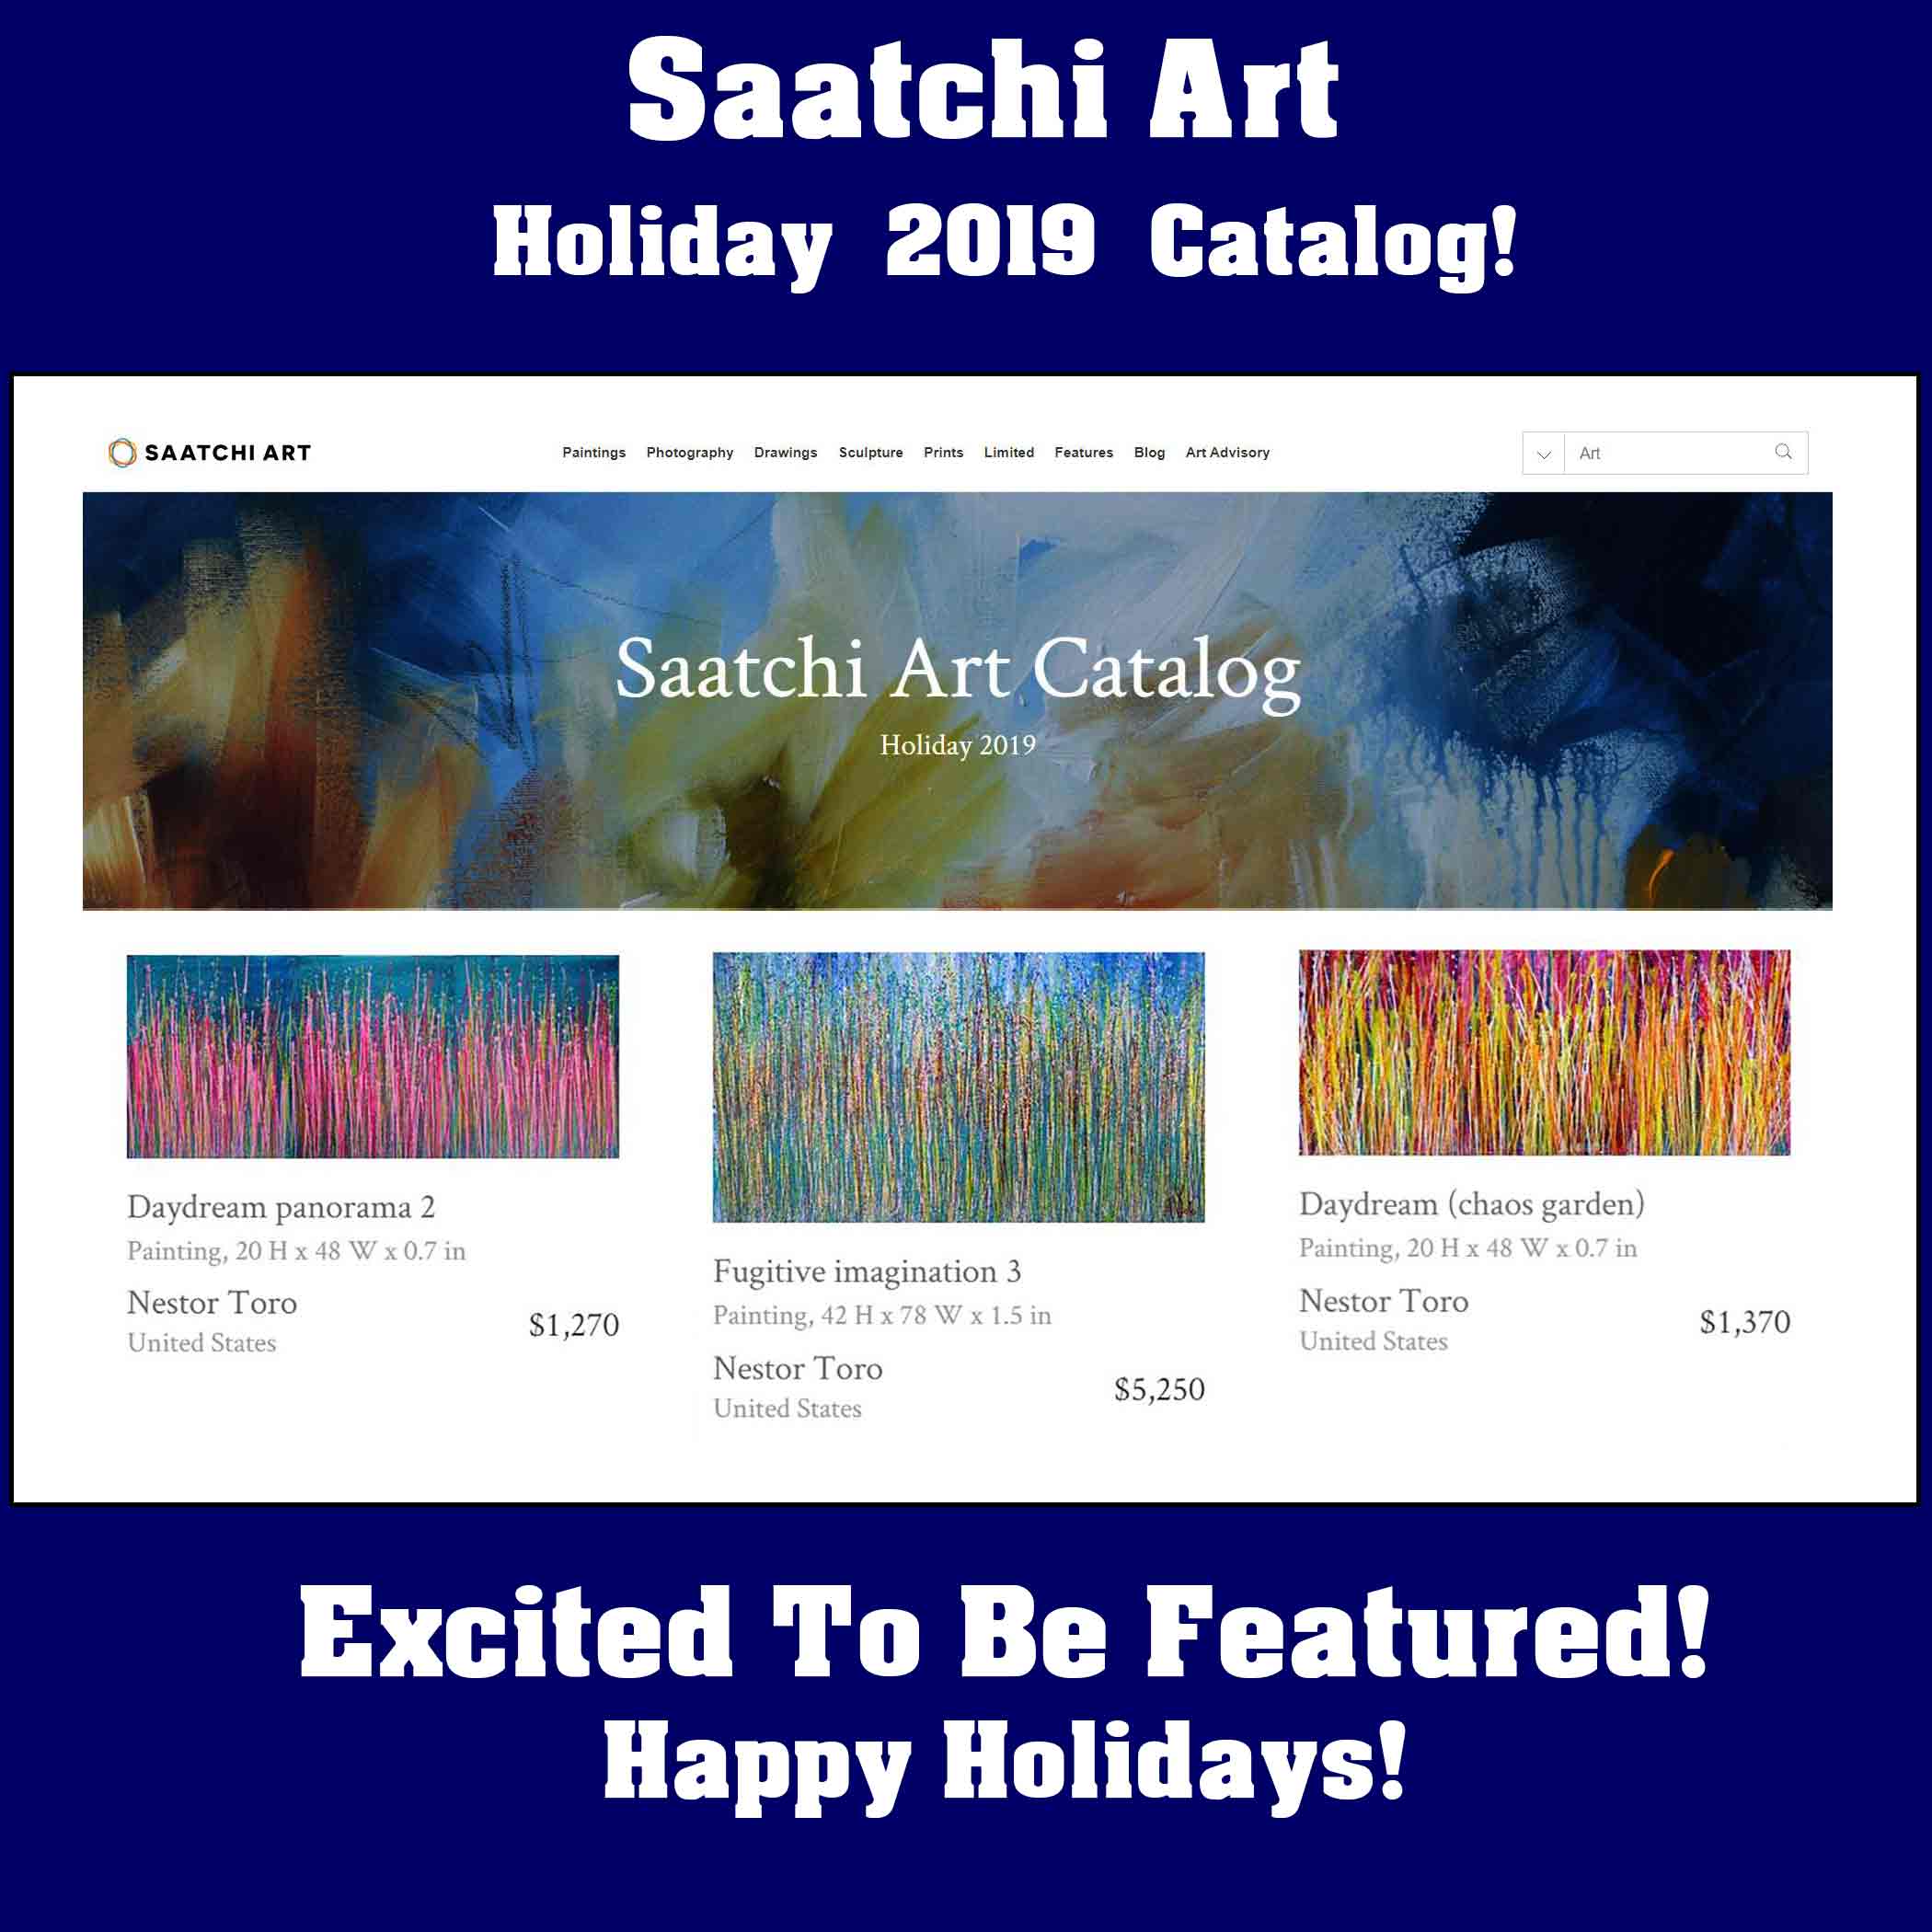 Saatchi Art 2019 Holiday Catalog (my work is on page 7)